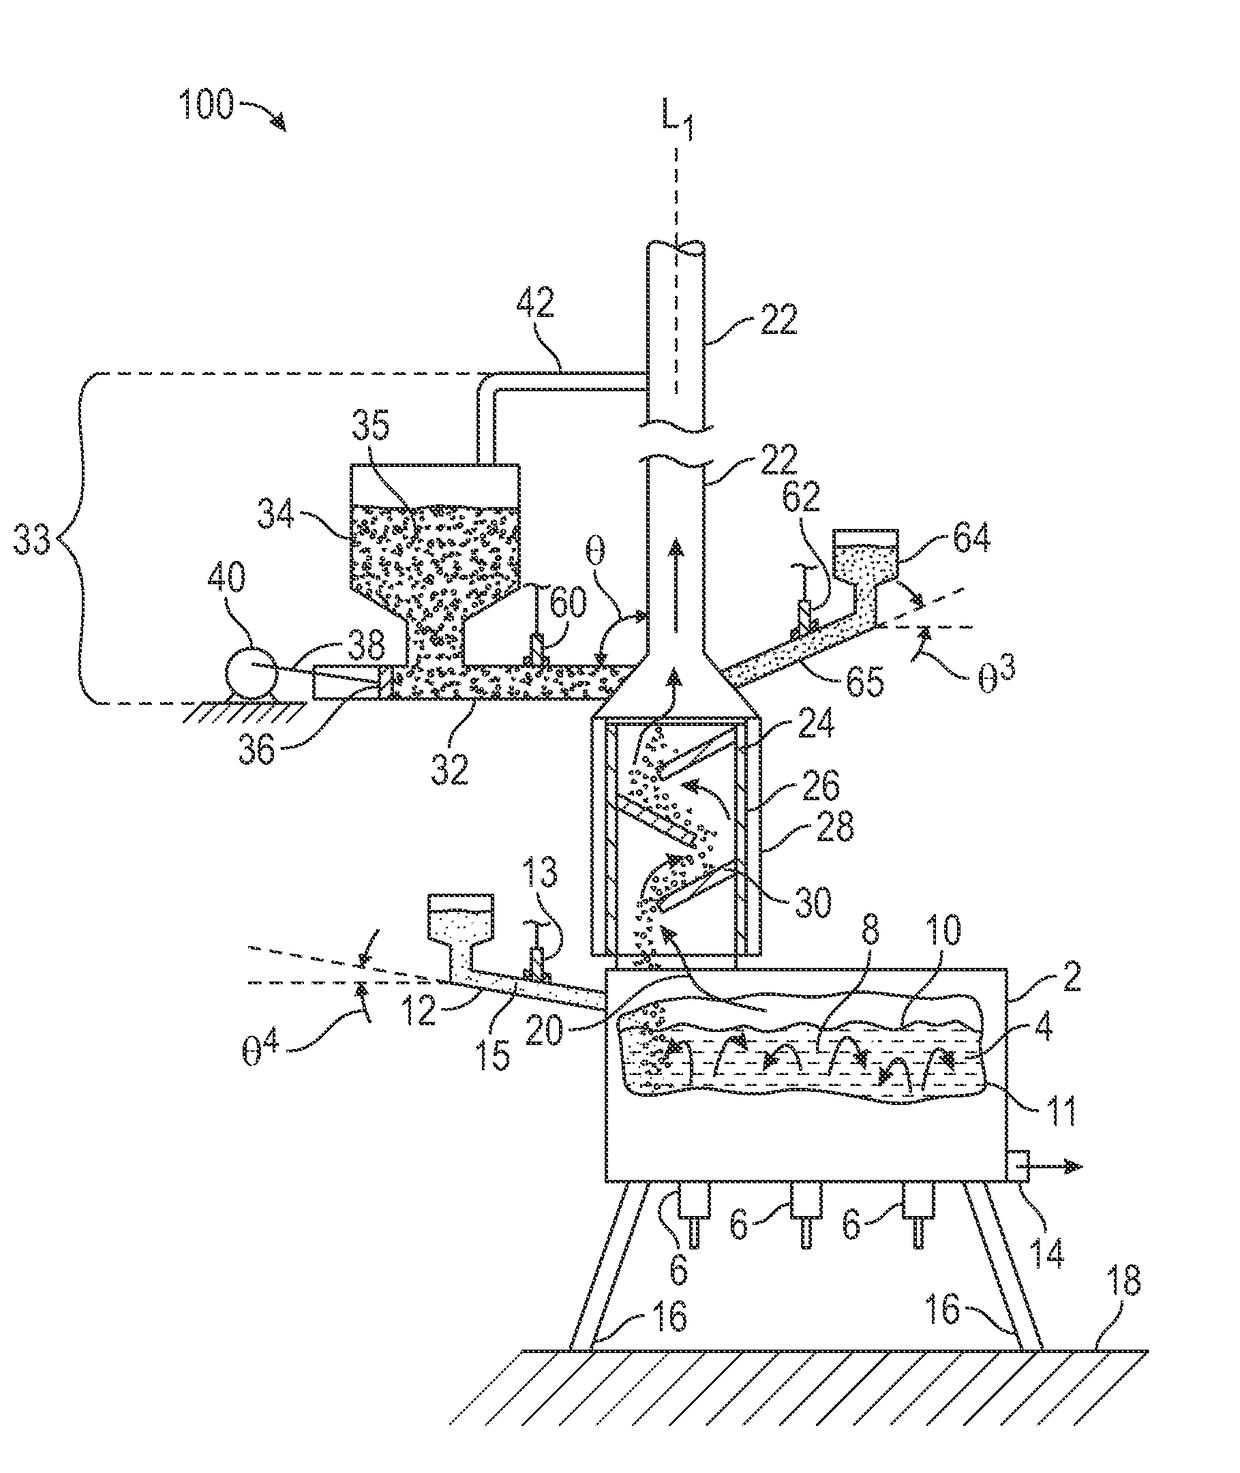 Apparatus, systems, and methods for pre-heating feedstock to a melter using melter exhaust